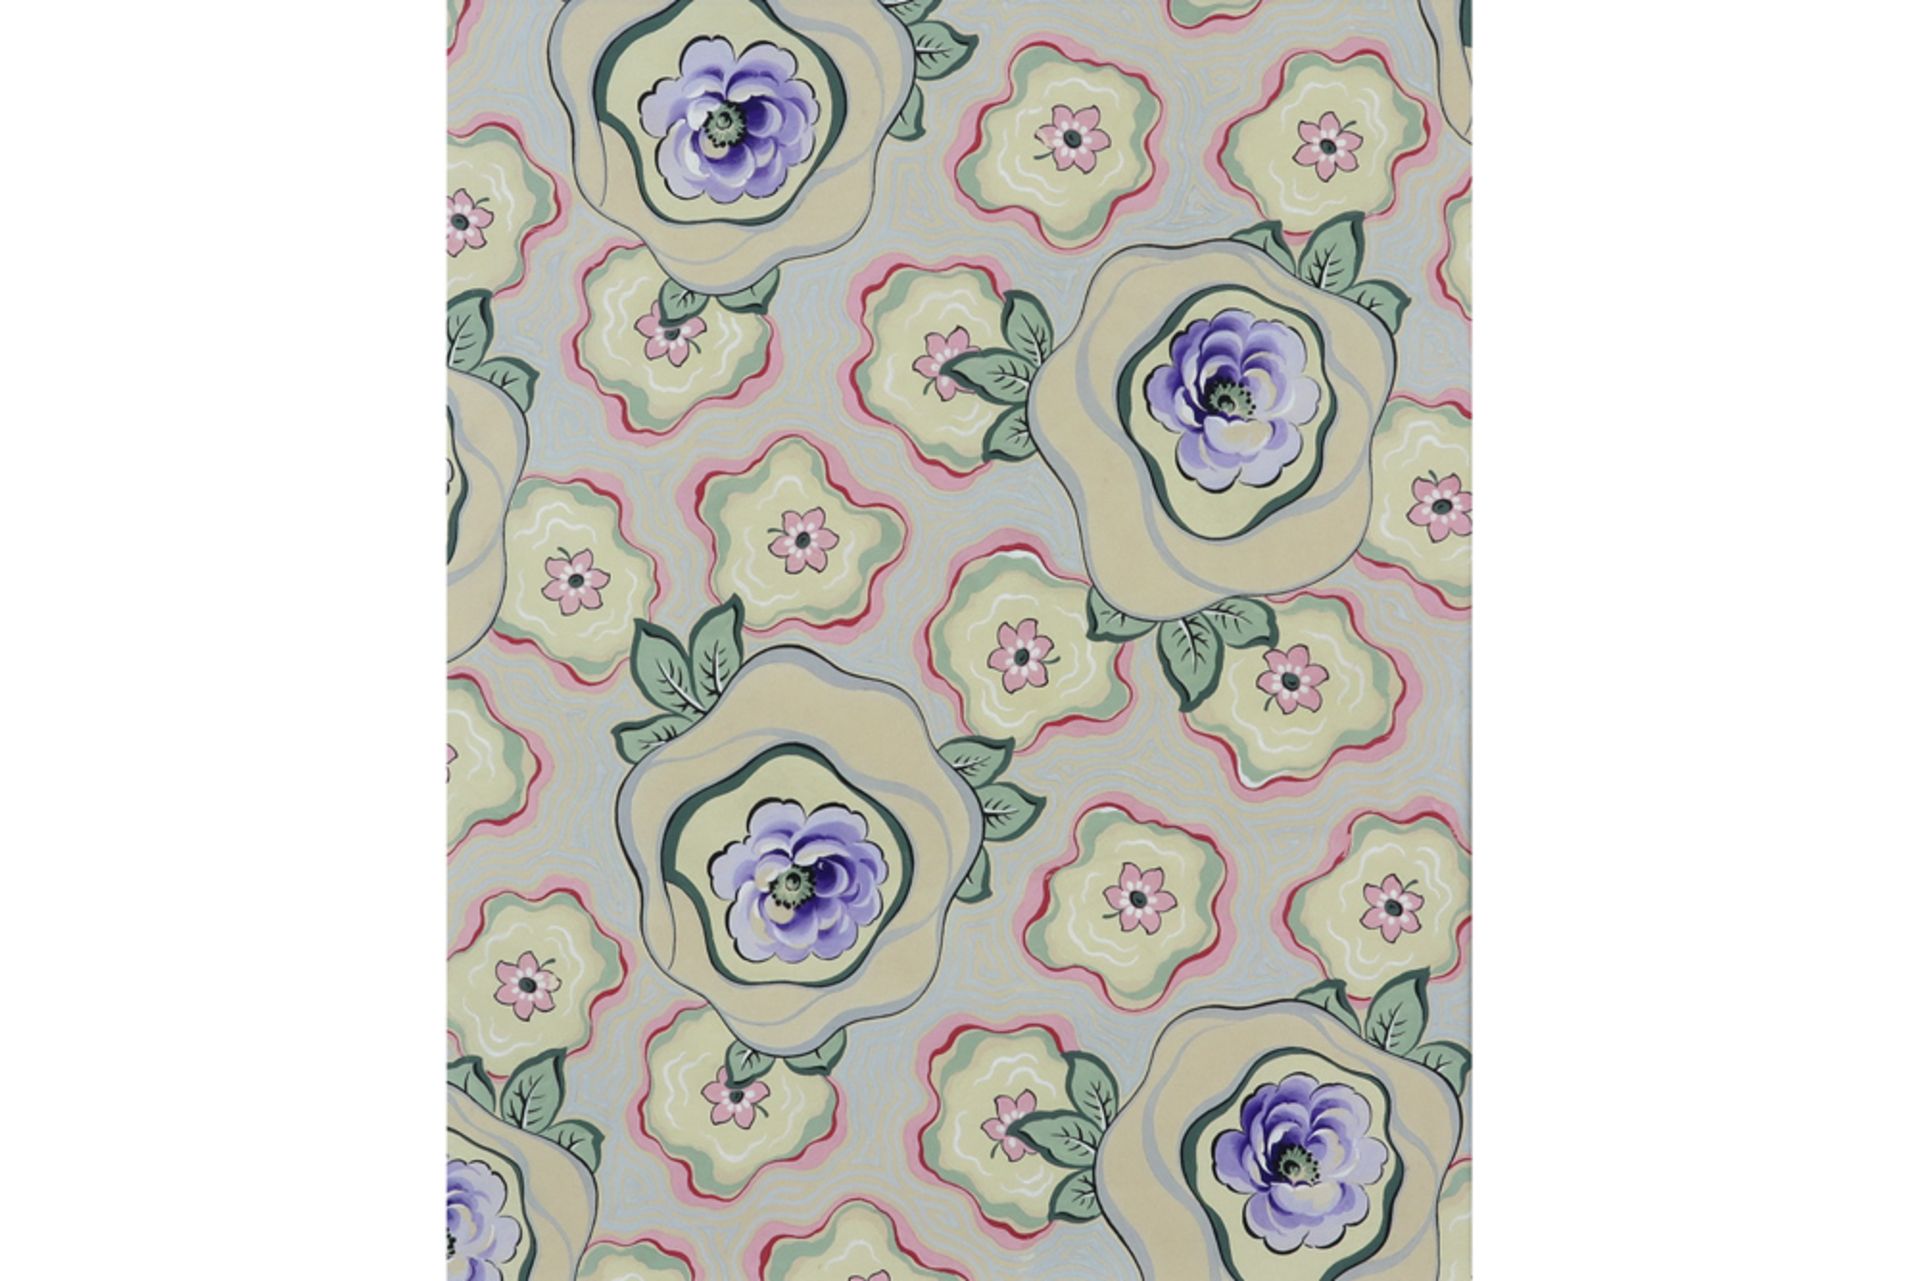 early 20th Cent. Russian aquarelle with a design presumably for wallpaper or textile - illegibly